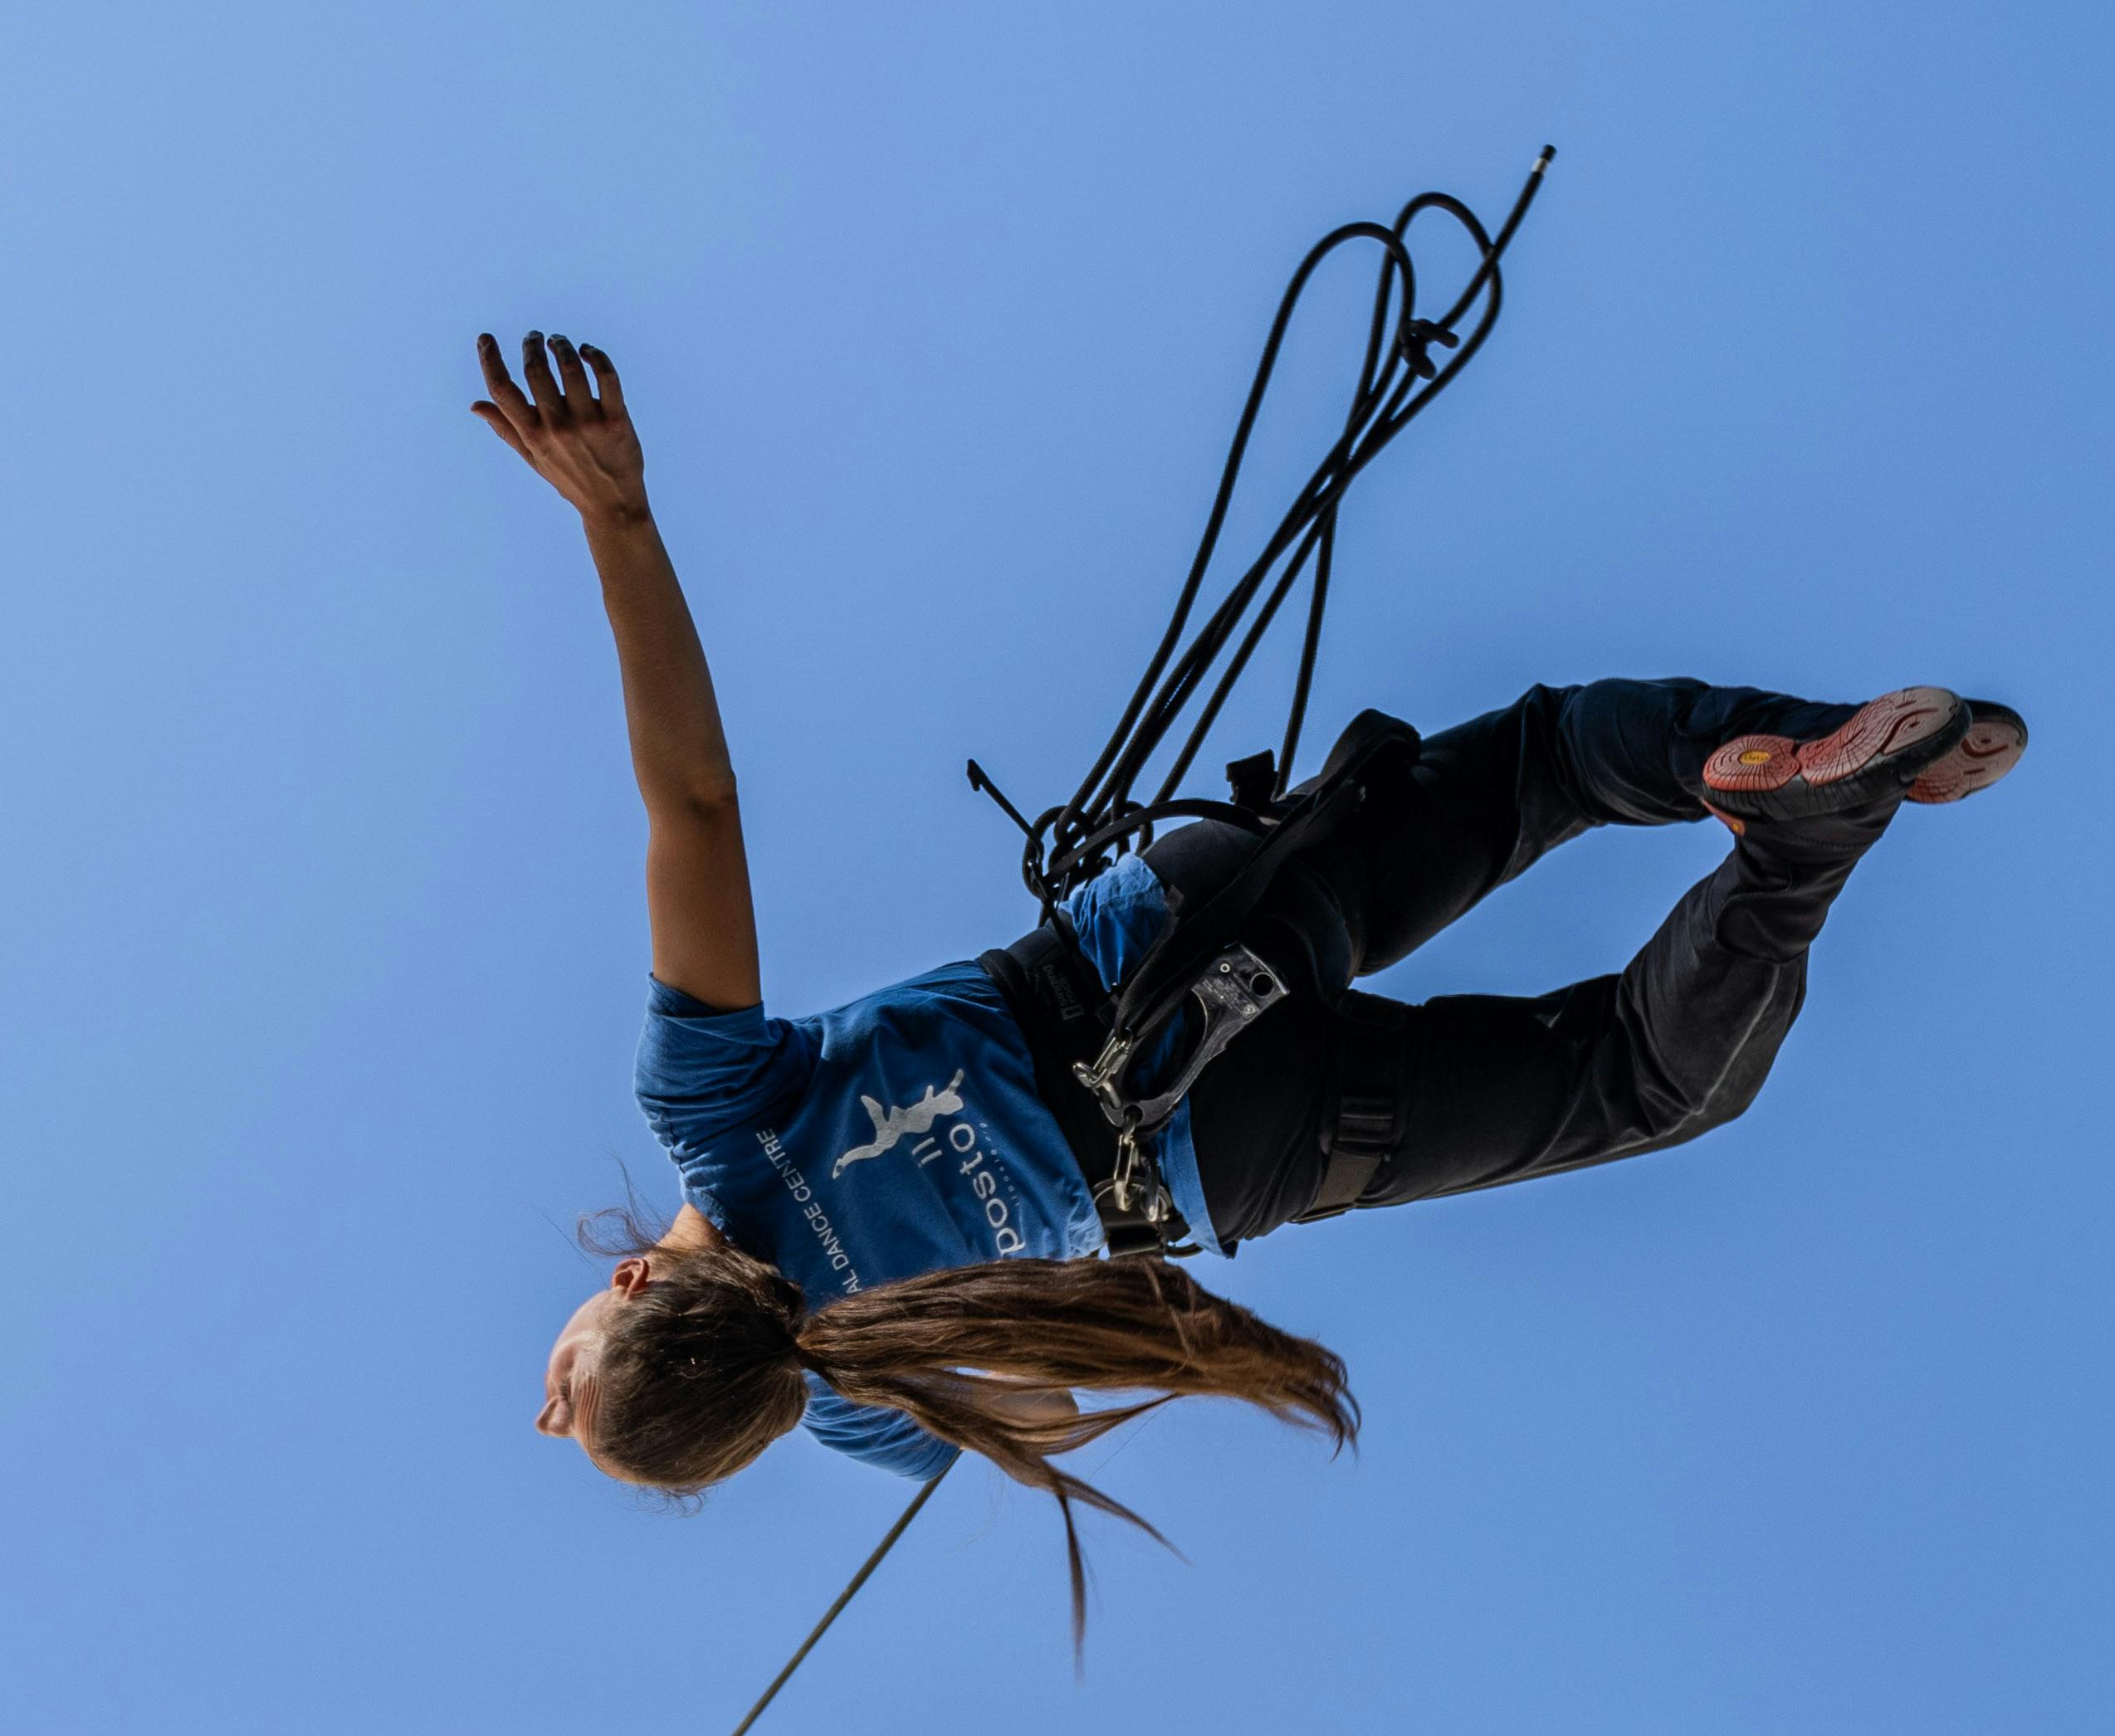 A dancer wearing a harness and hanging by a thread stands out against the sky with her back arched and her right arm open. Her long hair are laced in a tail